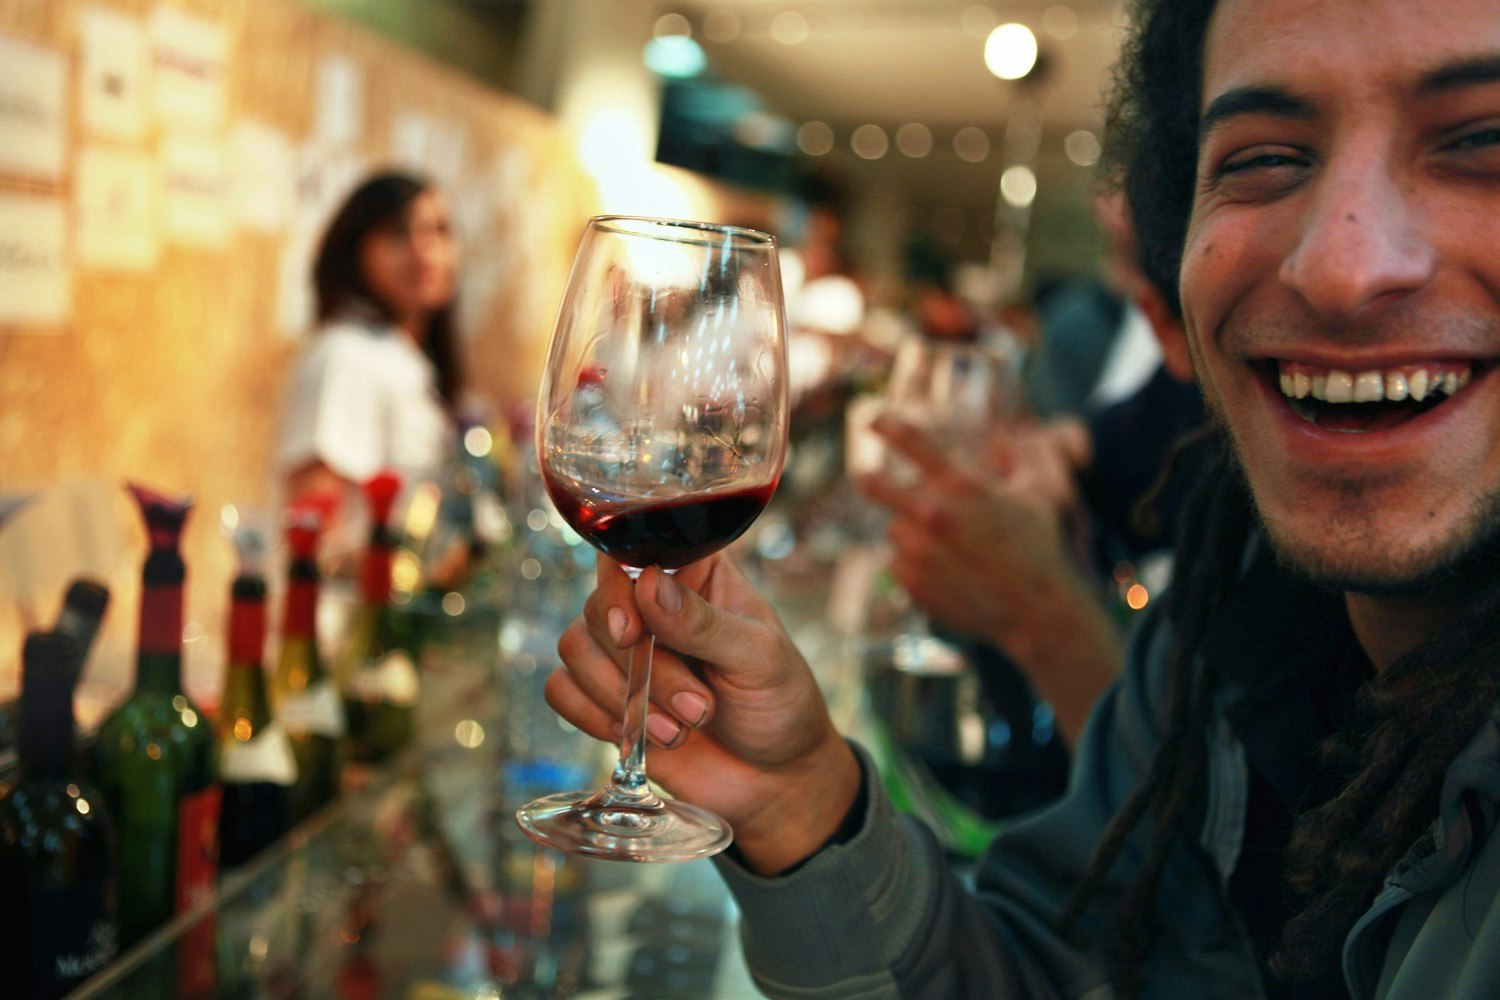 Enjoying a glass of red in a wine bar in Tel Aviv. Image by David Silverman / Getty Images